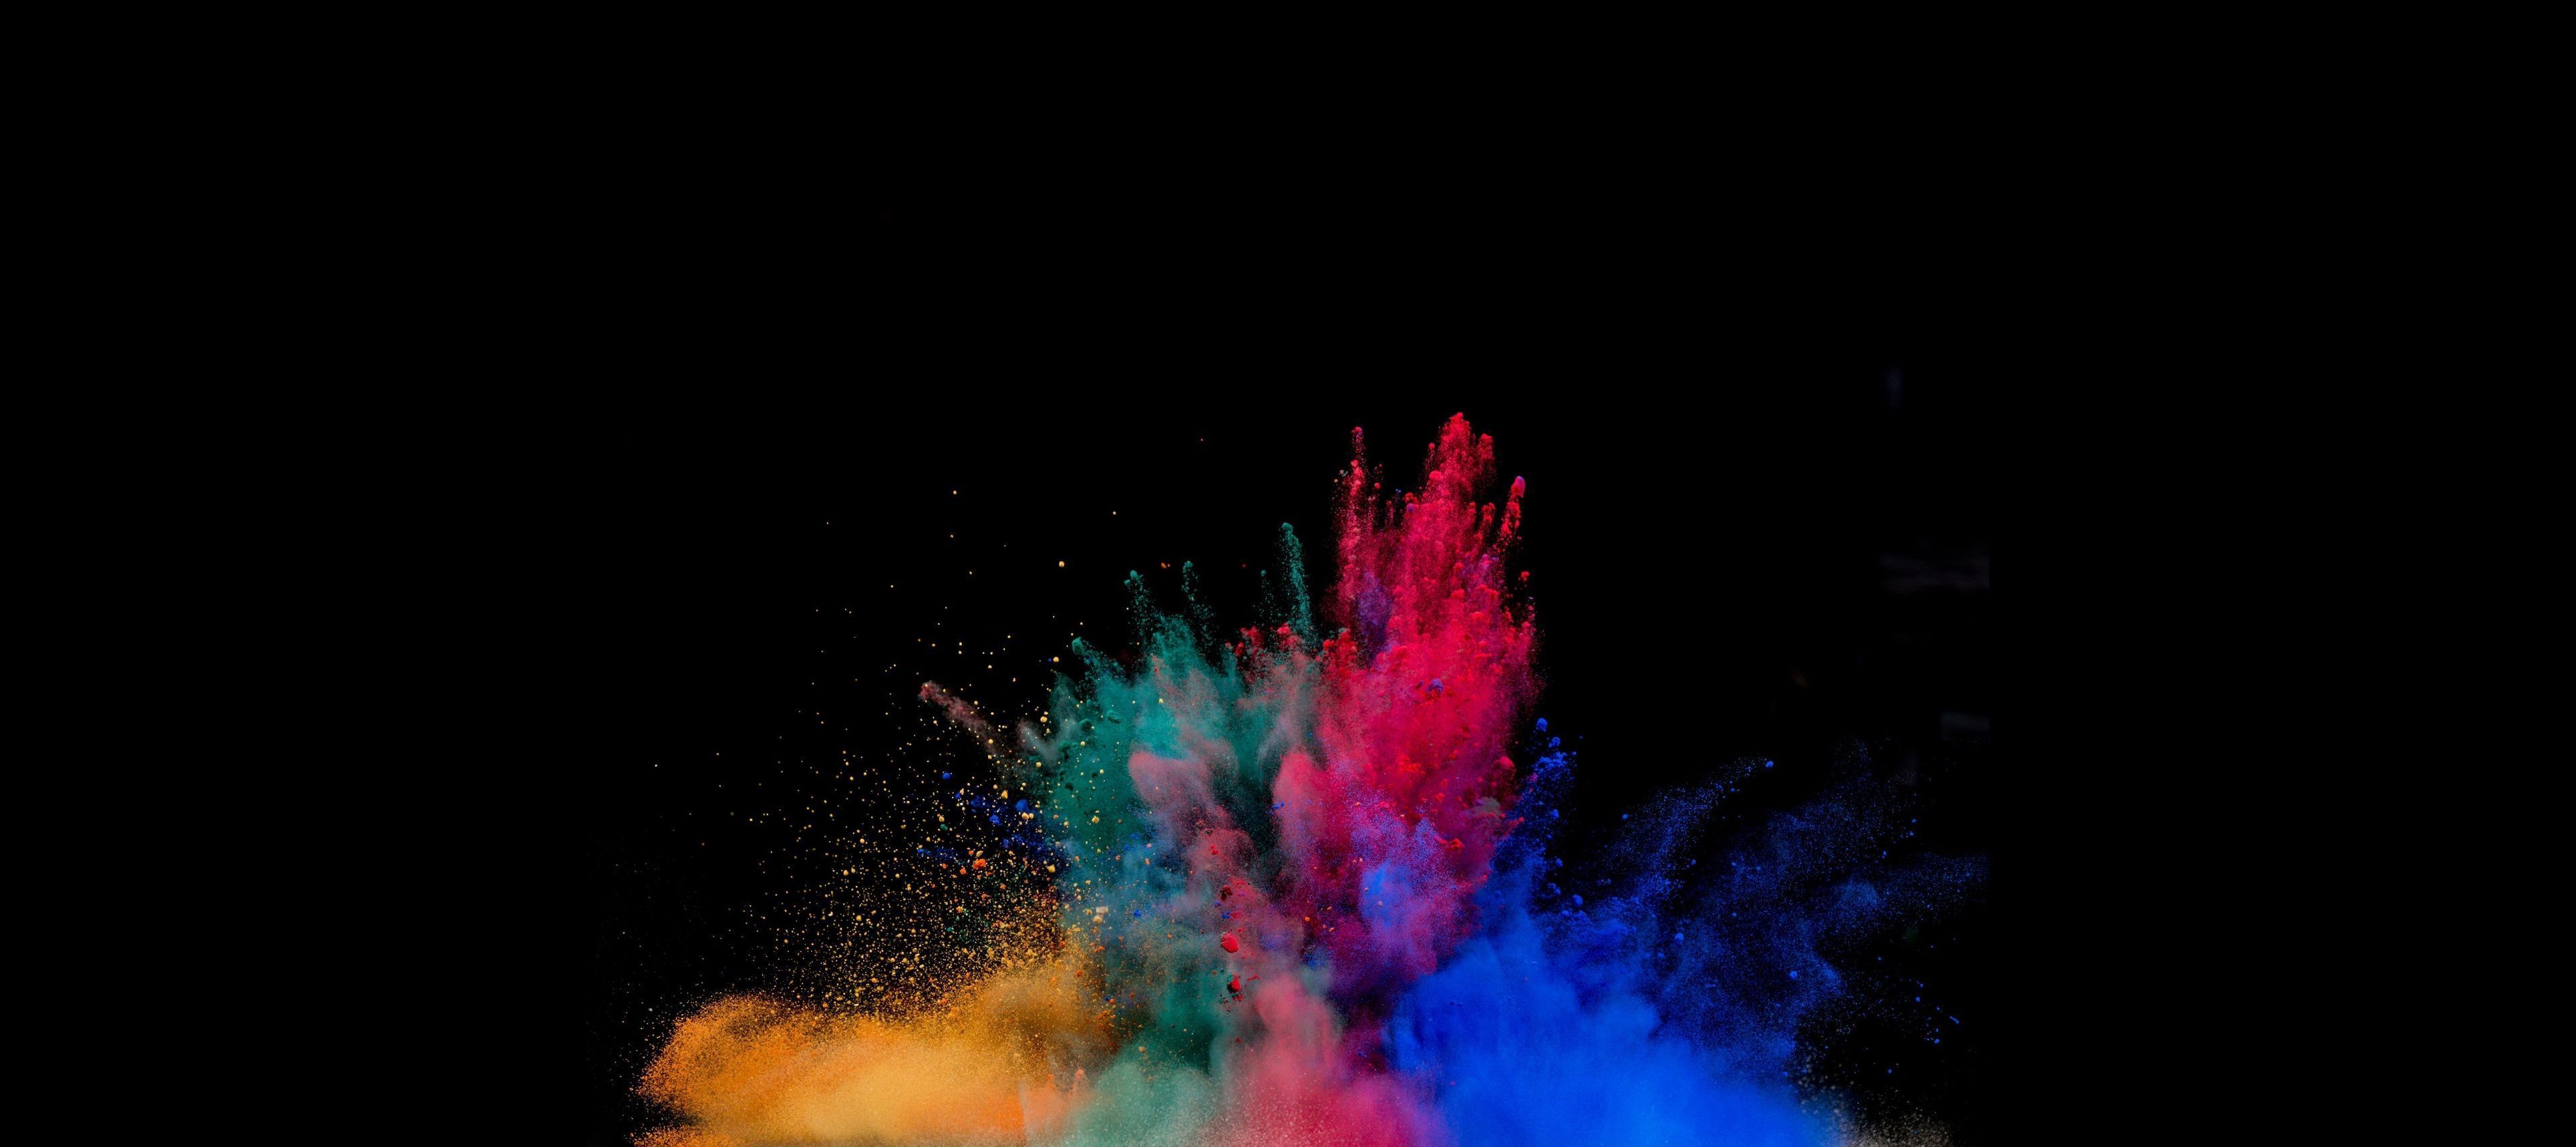 Space 4K Amoled wallpaper by ShmuelRosenbluth  Download on ZEDGE  8893